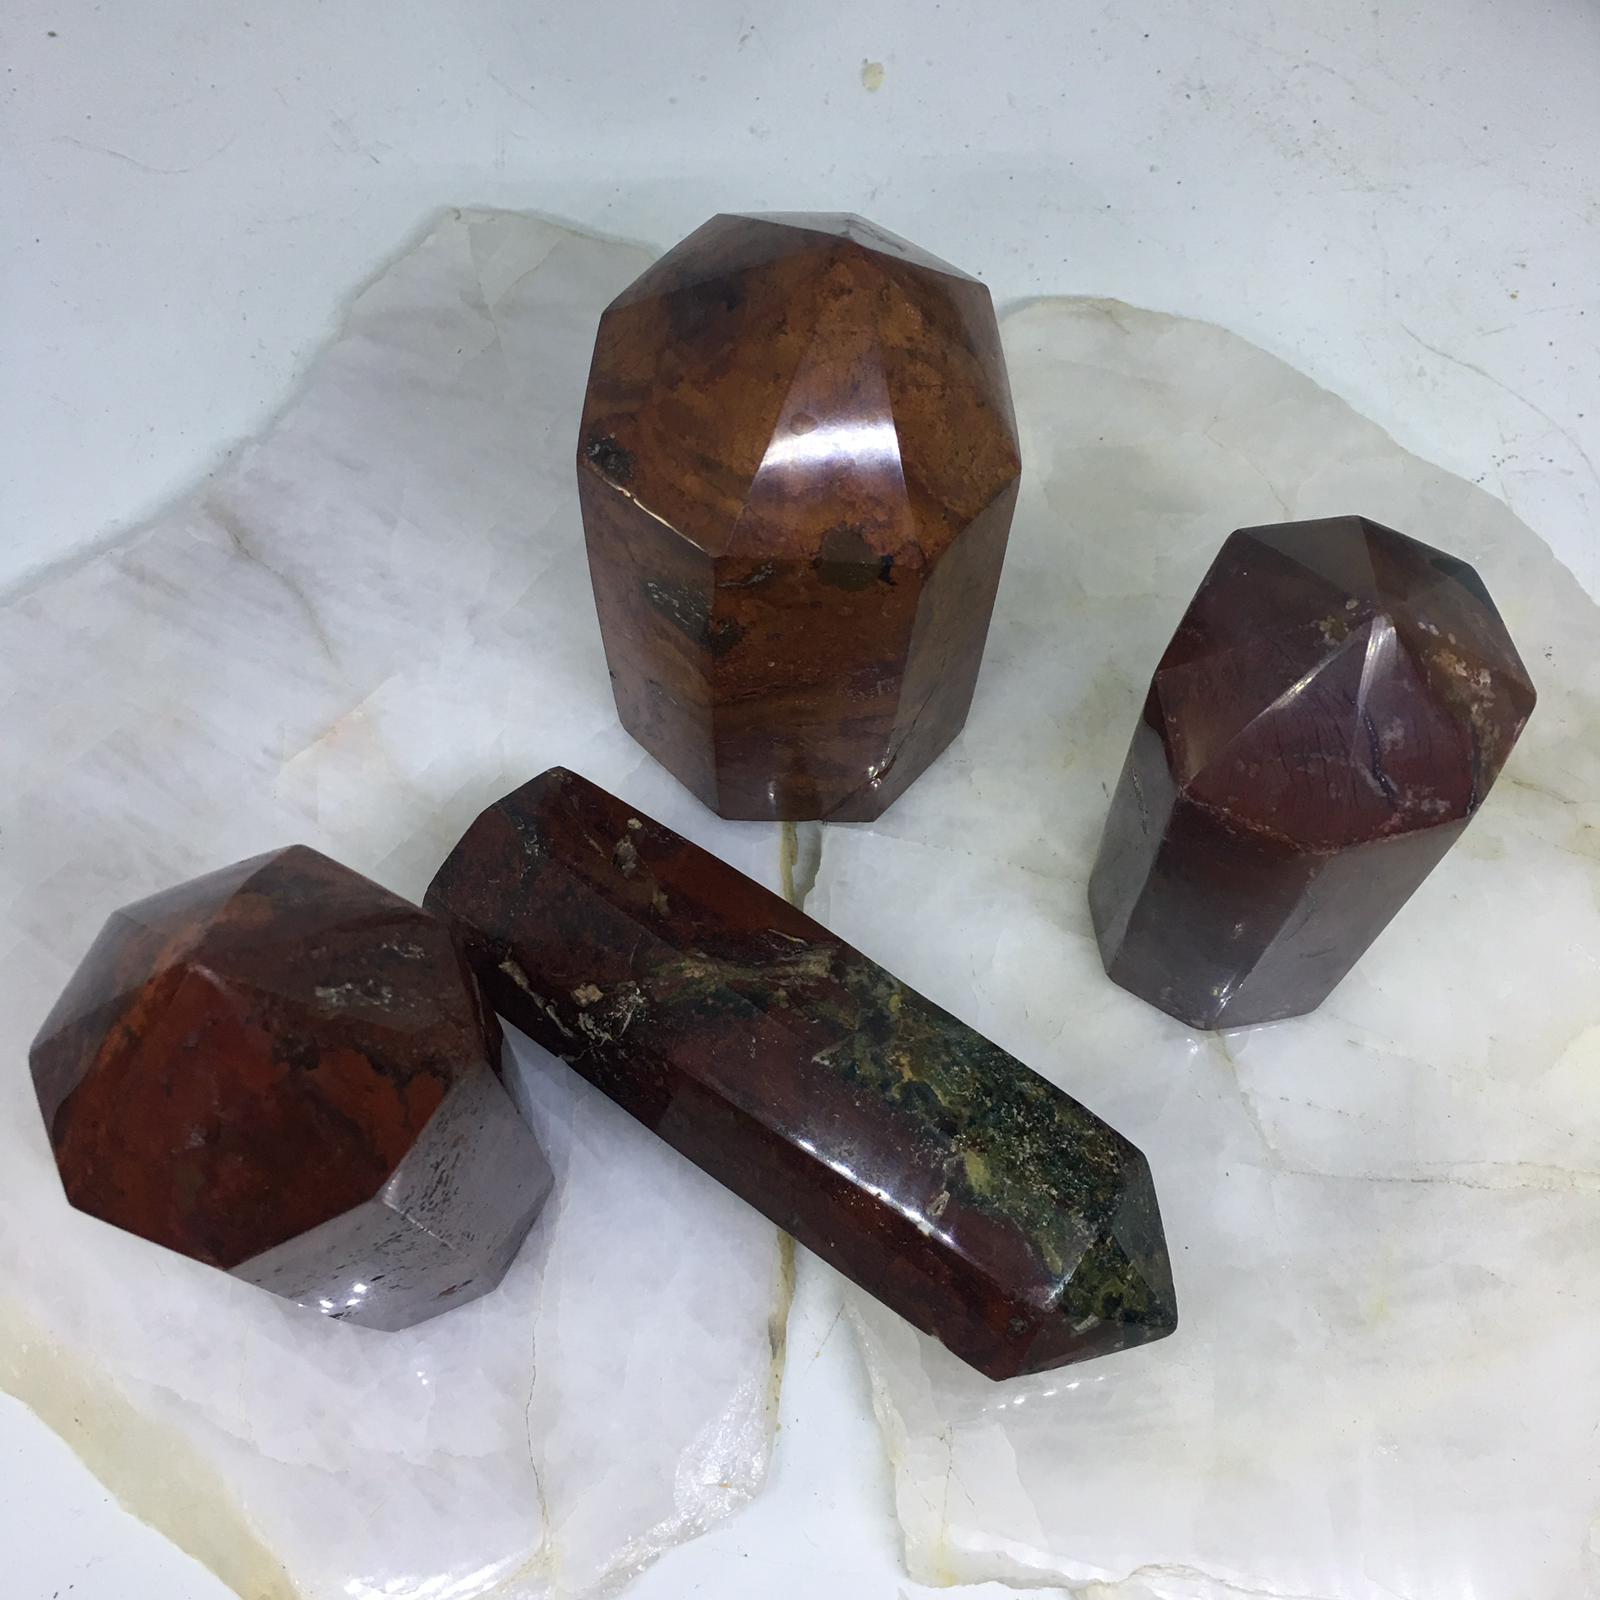 Stones from Uruguay - Pampa Red Jasper Points with 8 Facets/Faces